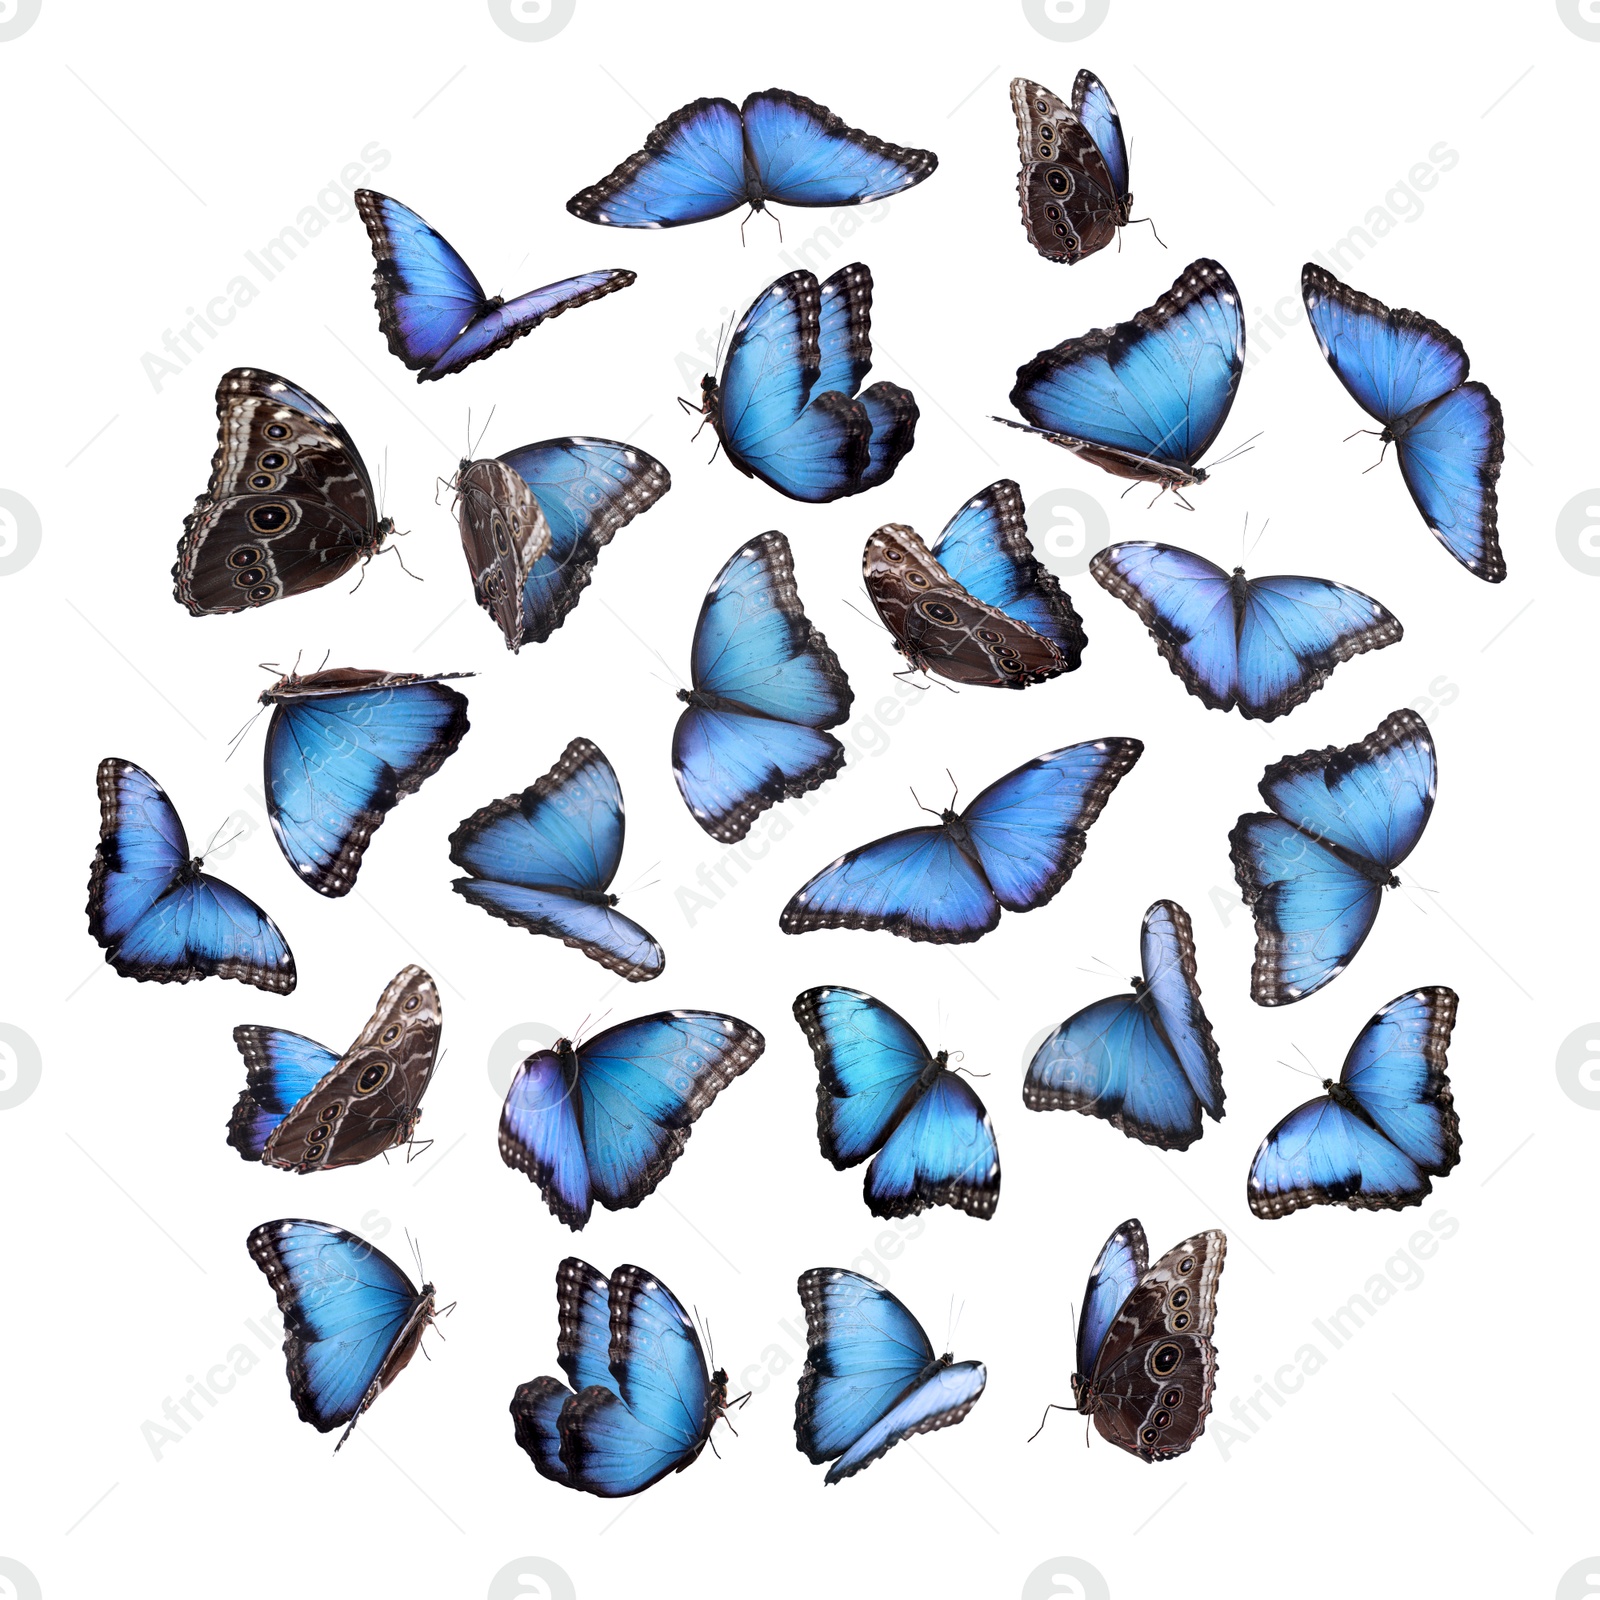 Image of Many beautiful butterflies on white background, collage